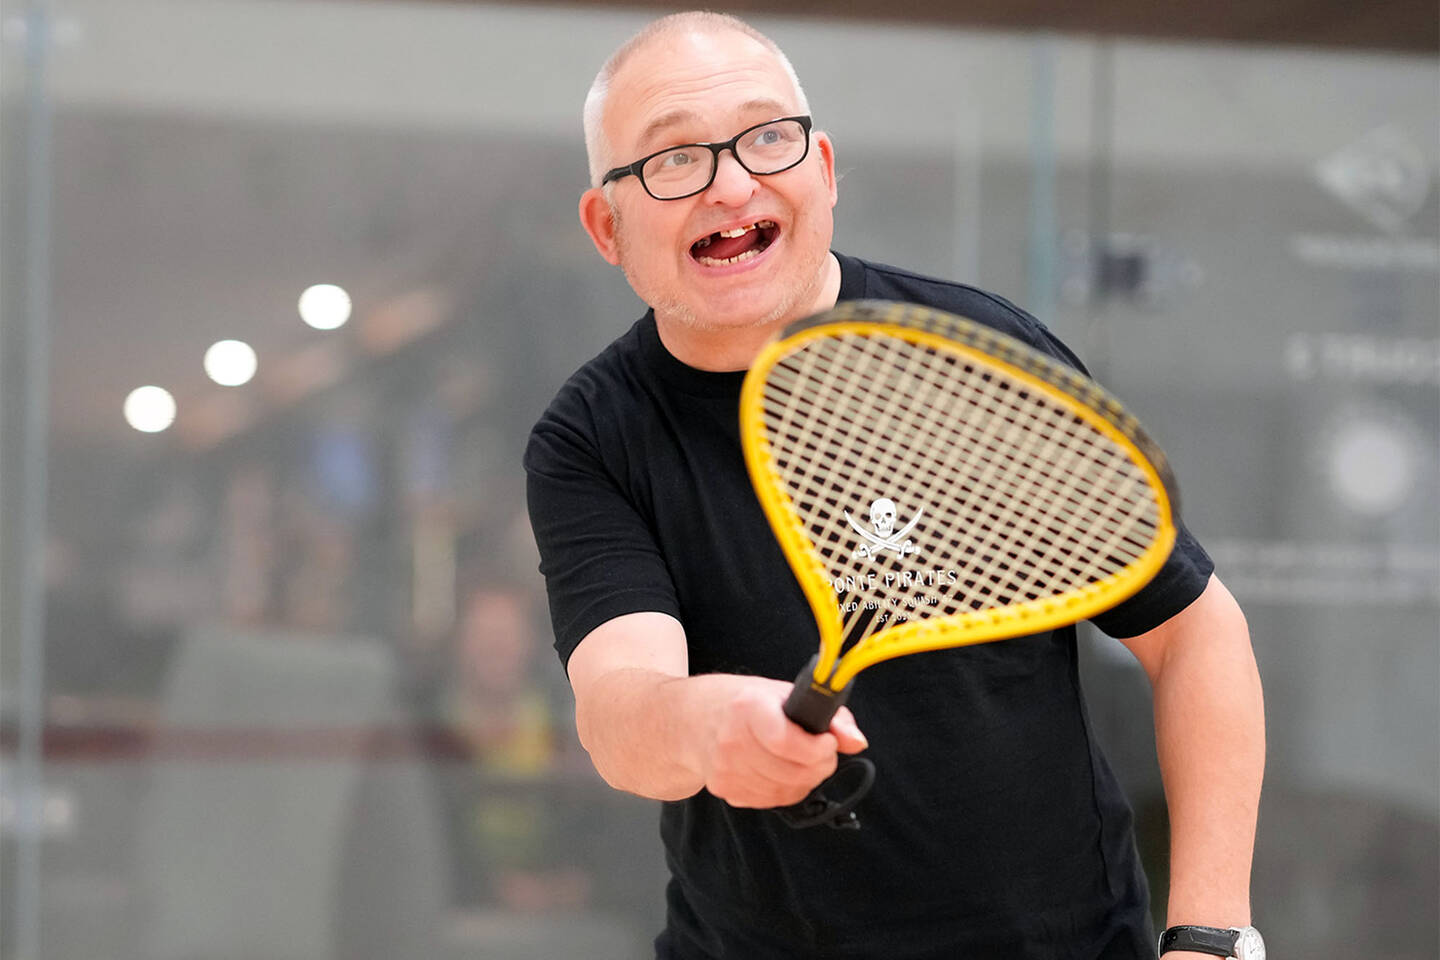 A man playing squash with a yellow racket.